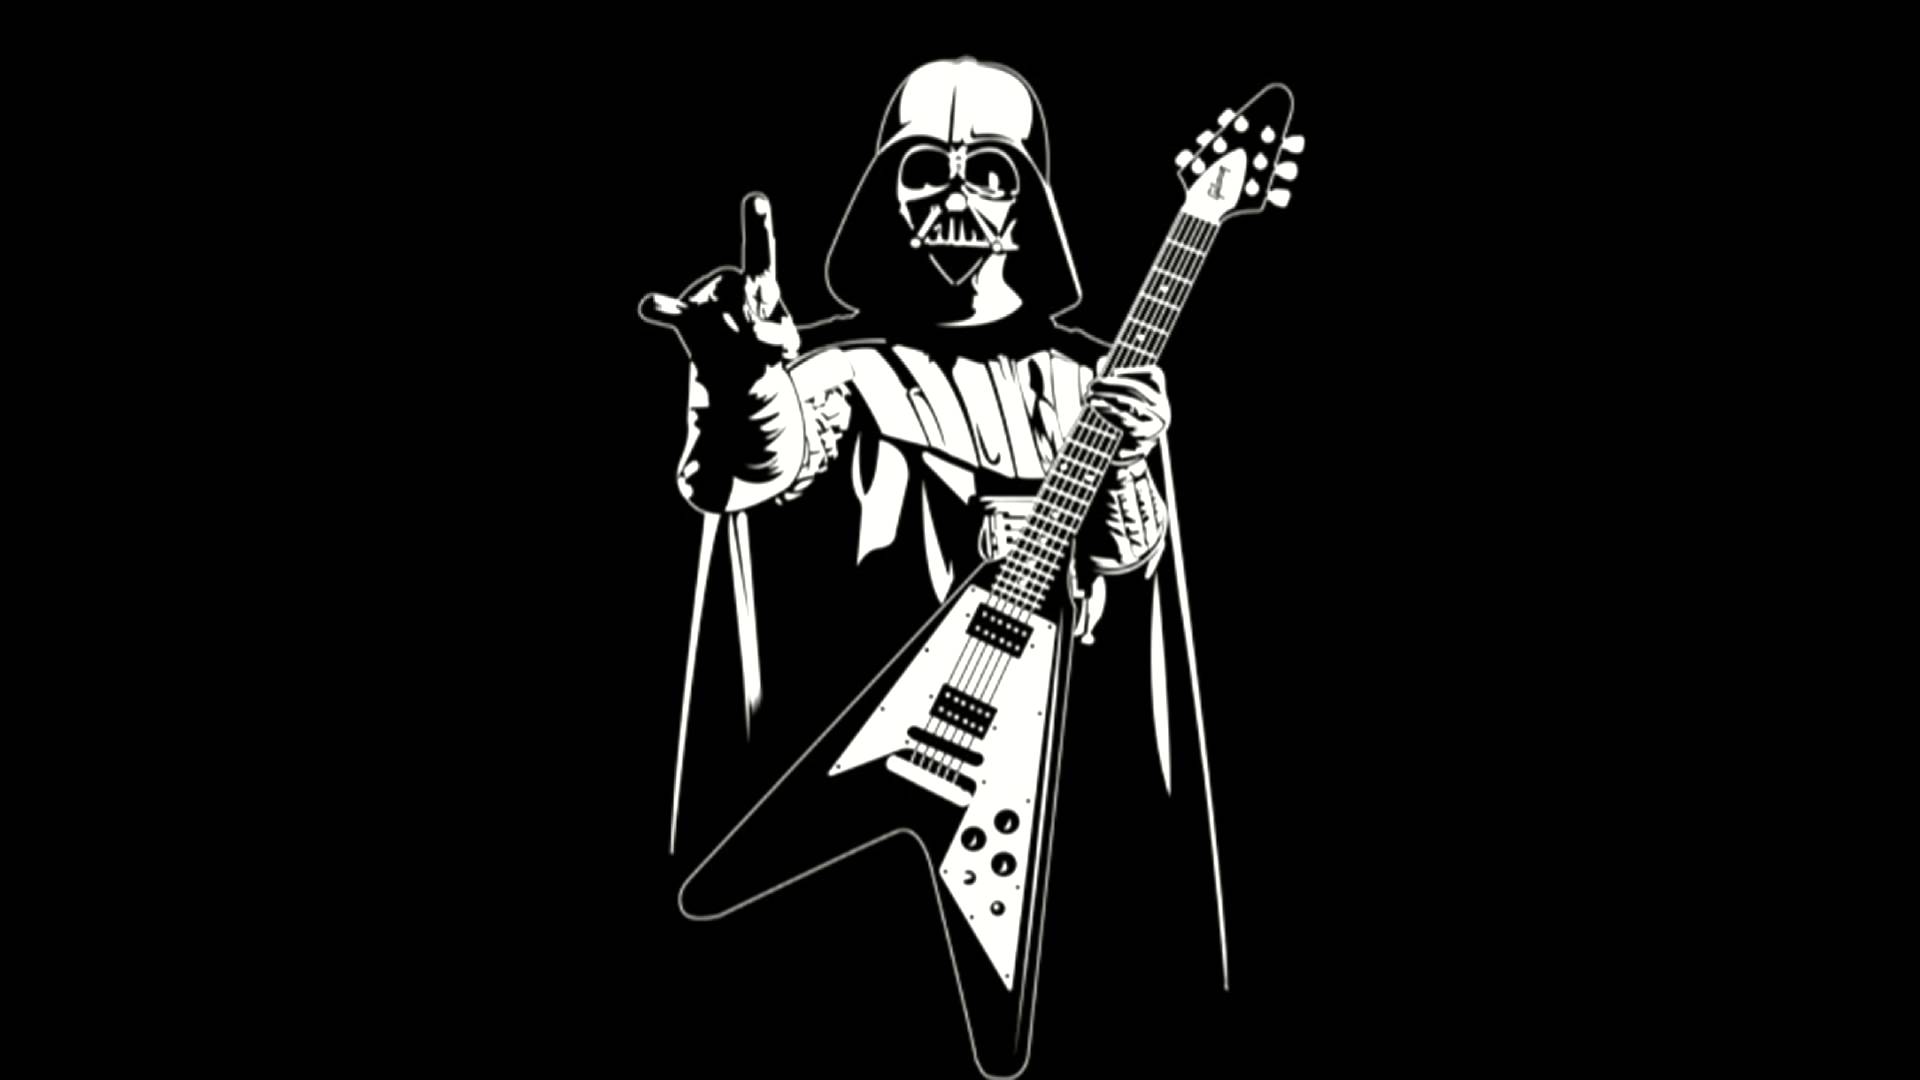 Imperial March - Darth Vader theme (Boma Metal Orchestra)